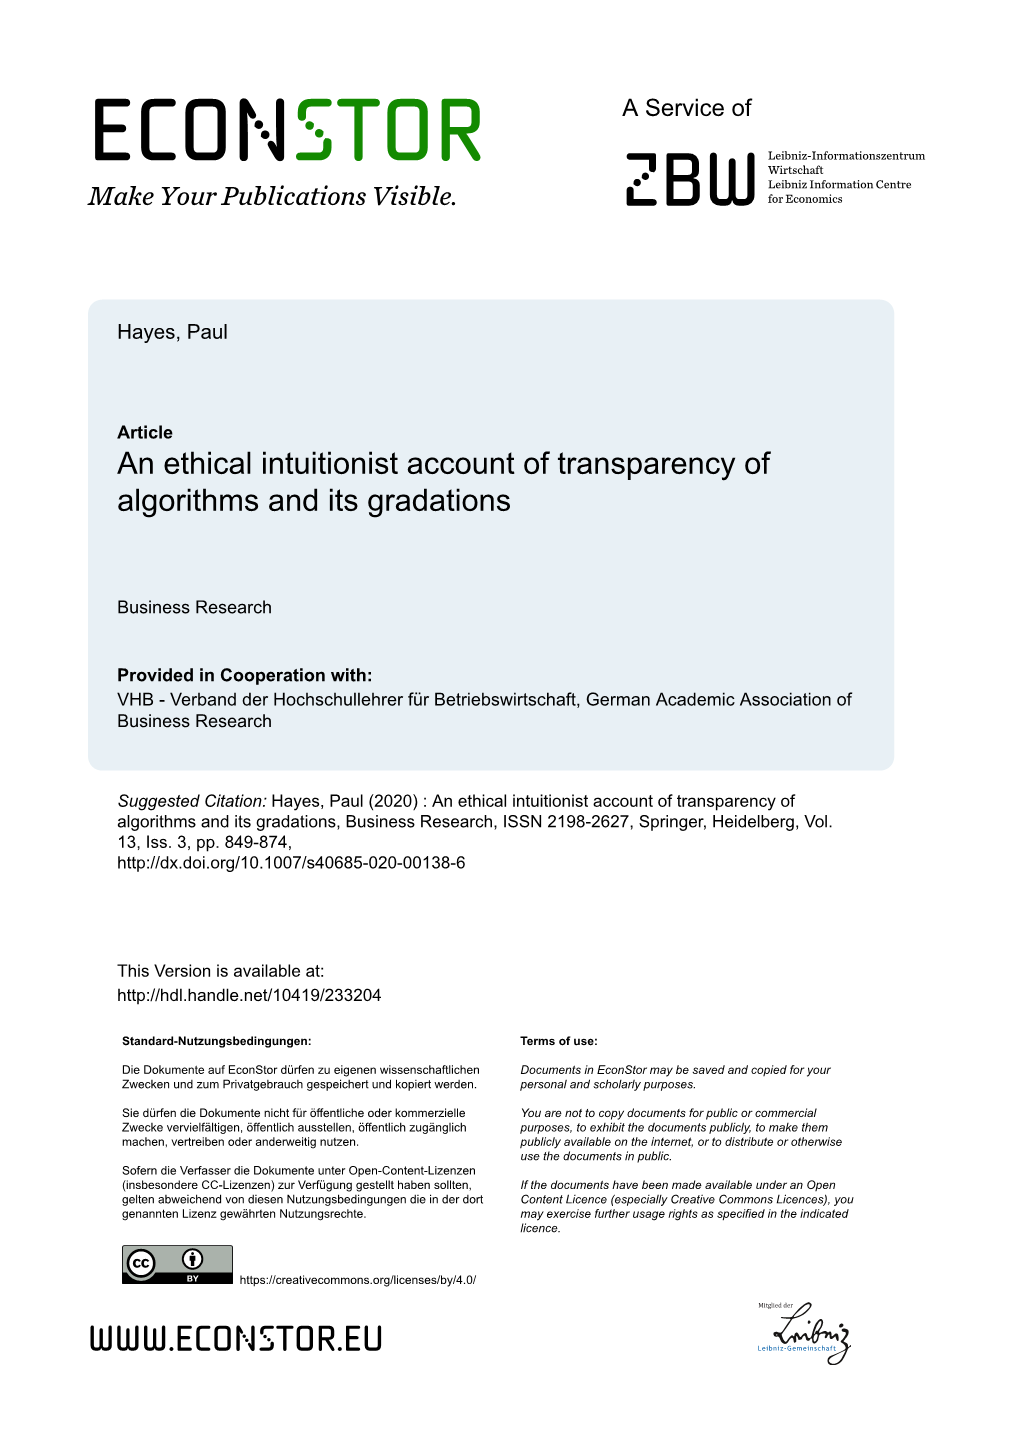 An Ethical Intuitionist Account of Transparency of Algorithms and Its Gradations